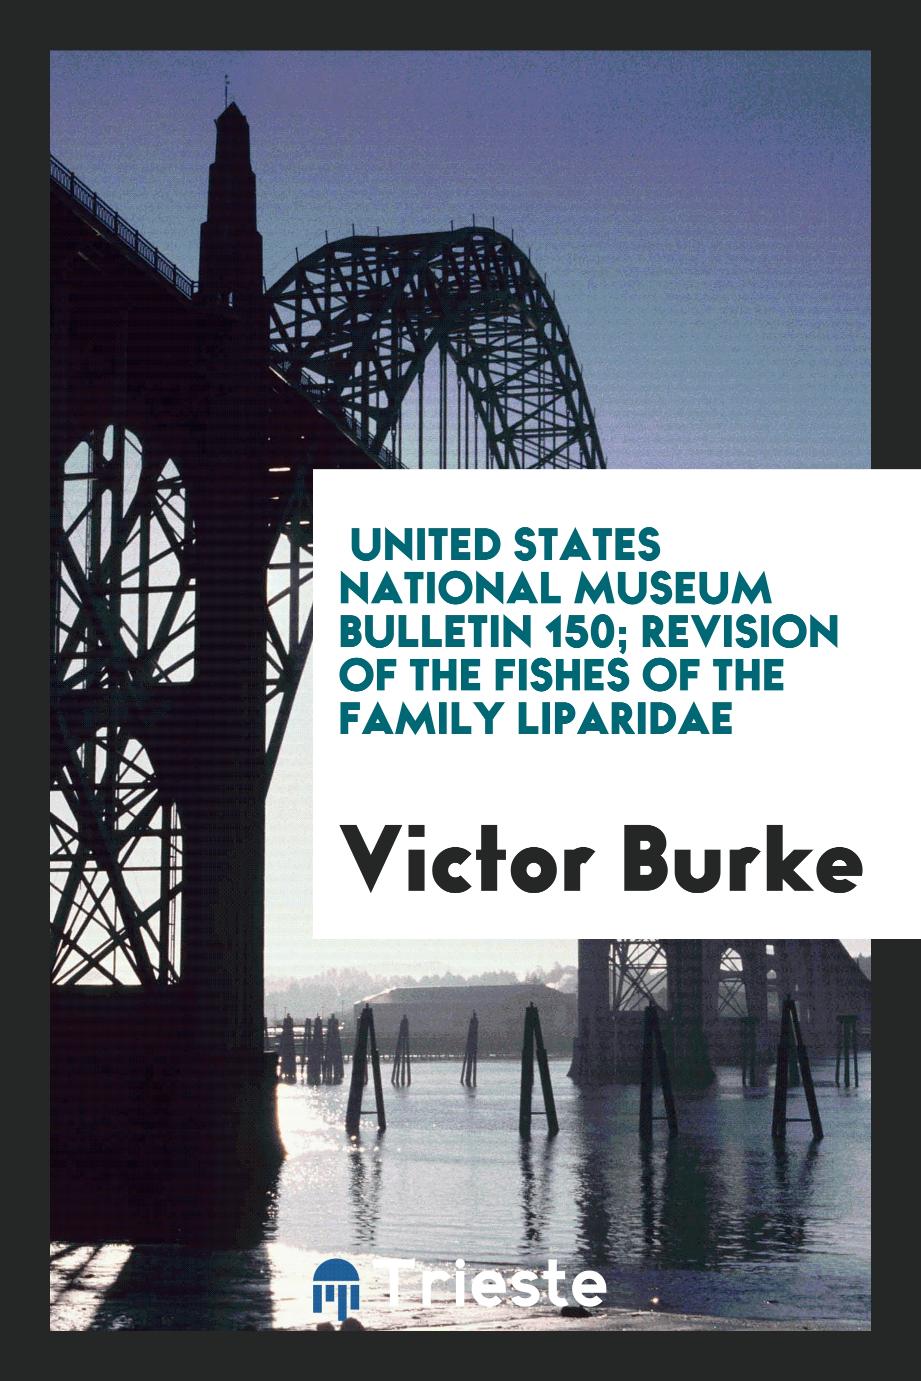 United States National Museum Bulletin 150; Revision of the fishes of the family liparidae